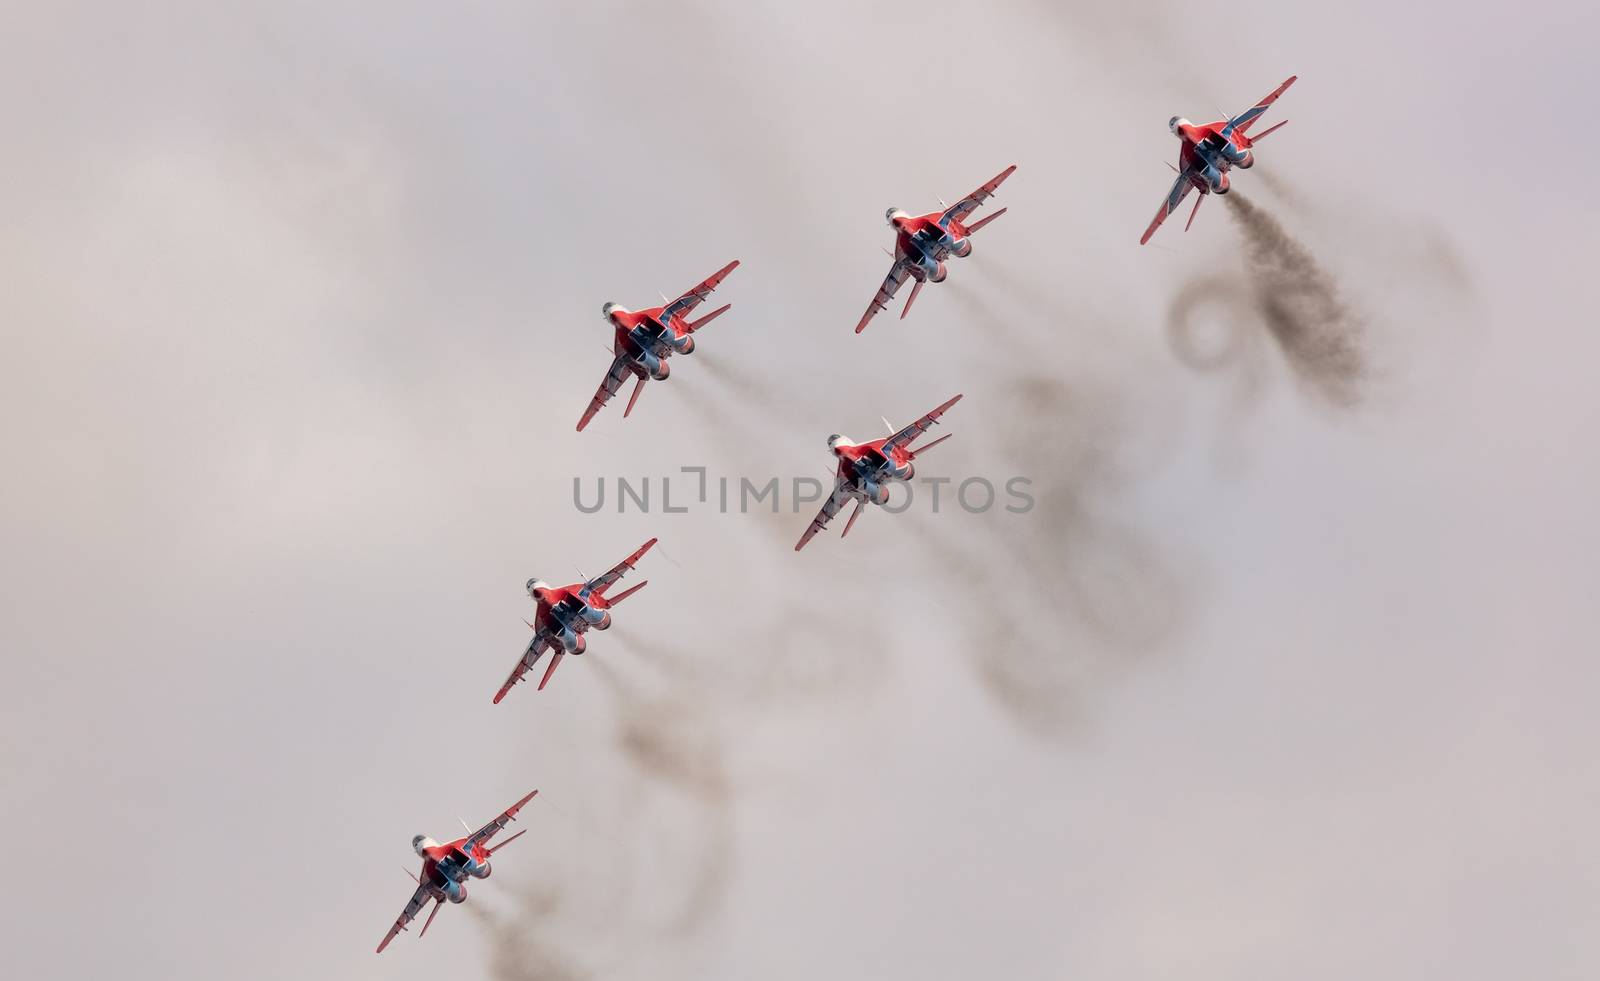 Barnaul, Russia - September 19, 2020: A low angle shot of Strizhi MiG-29 fighter jet squadron performing stunts during an aeroshow.